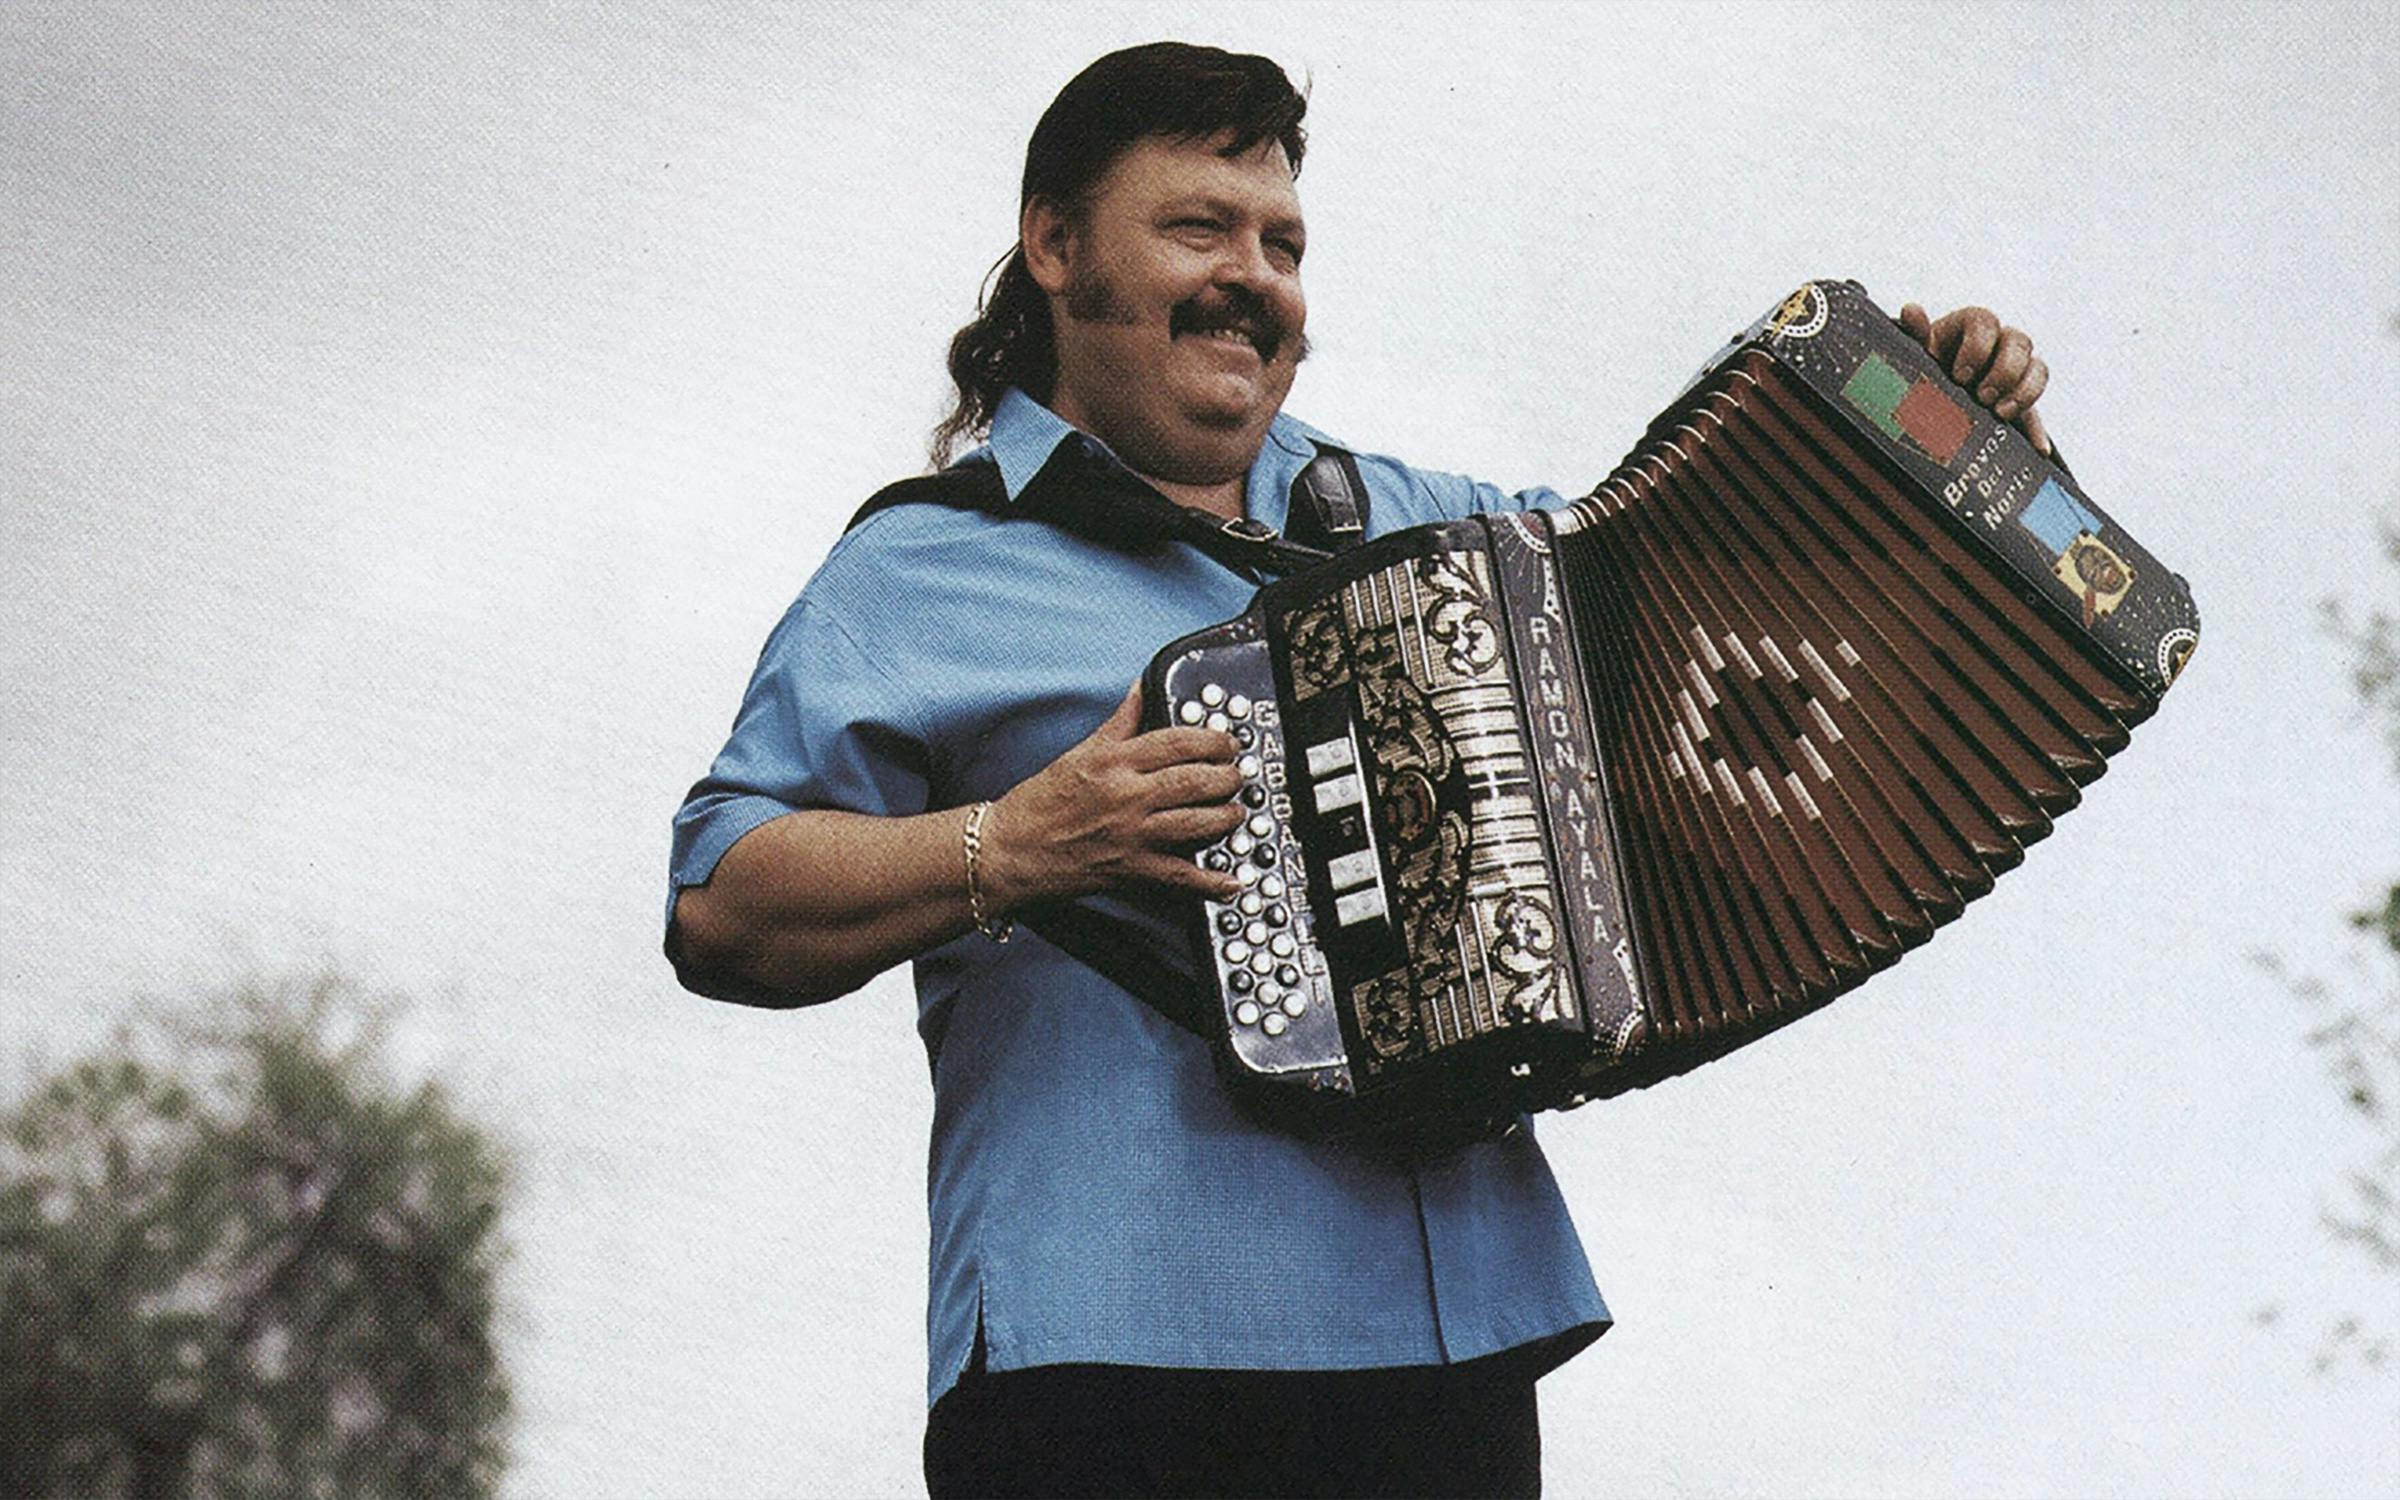 King of the Accordion – Texas Monthly